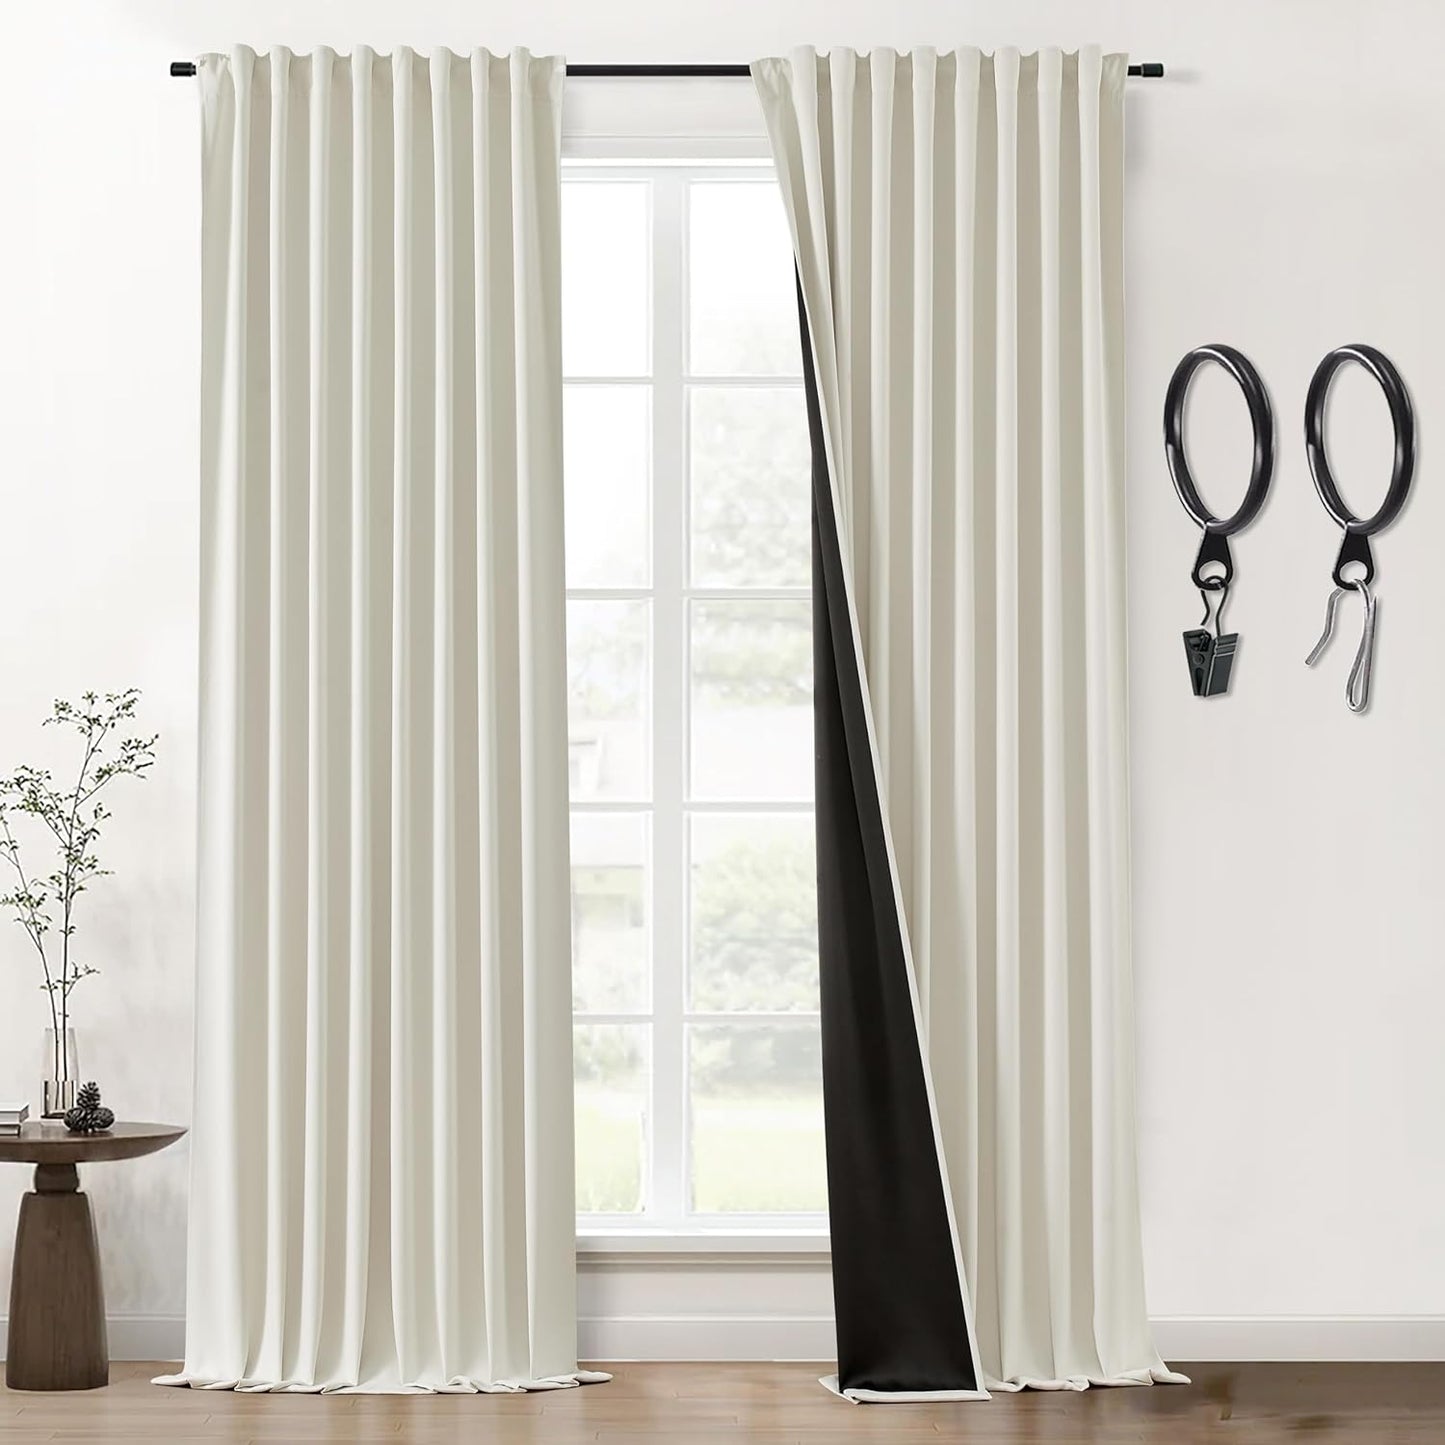 SHINELAND Beige Room Darkening Curtains 105 Inches Long for Living Room Bedroom,Cortinas Para Cuarto Bloqueador De Luz,Thermal Insulated Back Tab Pleat Blackout Curtains for Sunroom Patio Door Indoor  SHINELAND Cream 2X(52"Wx96"L) 